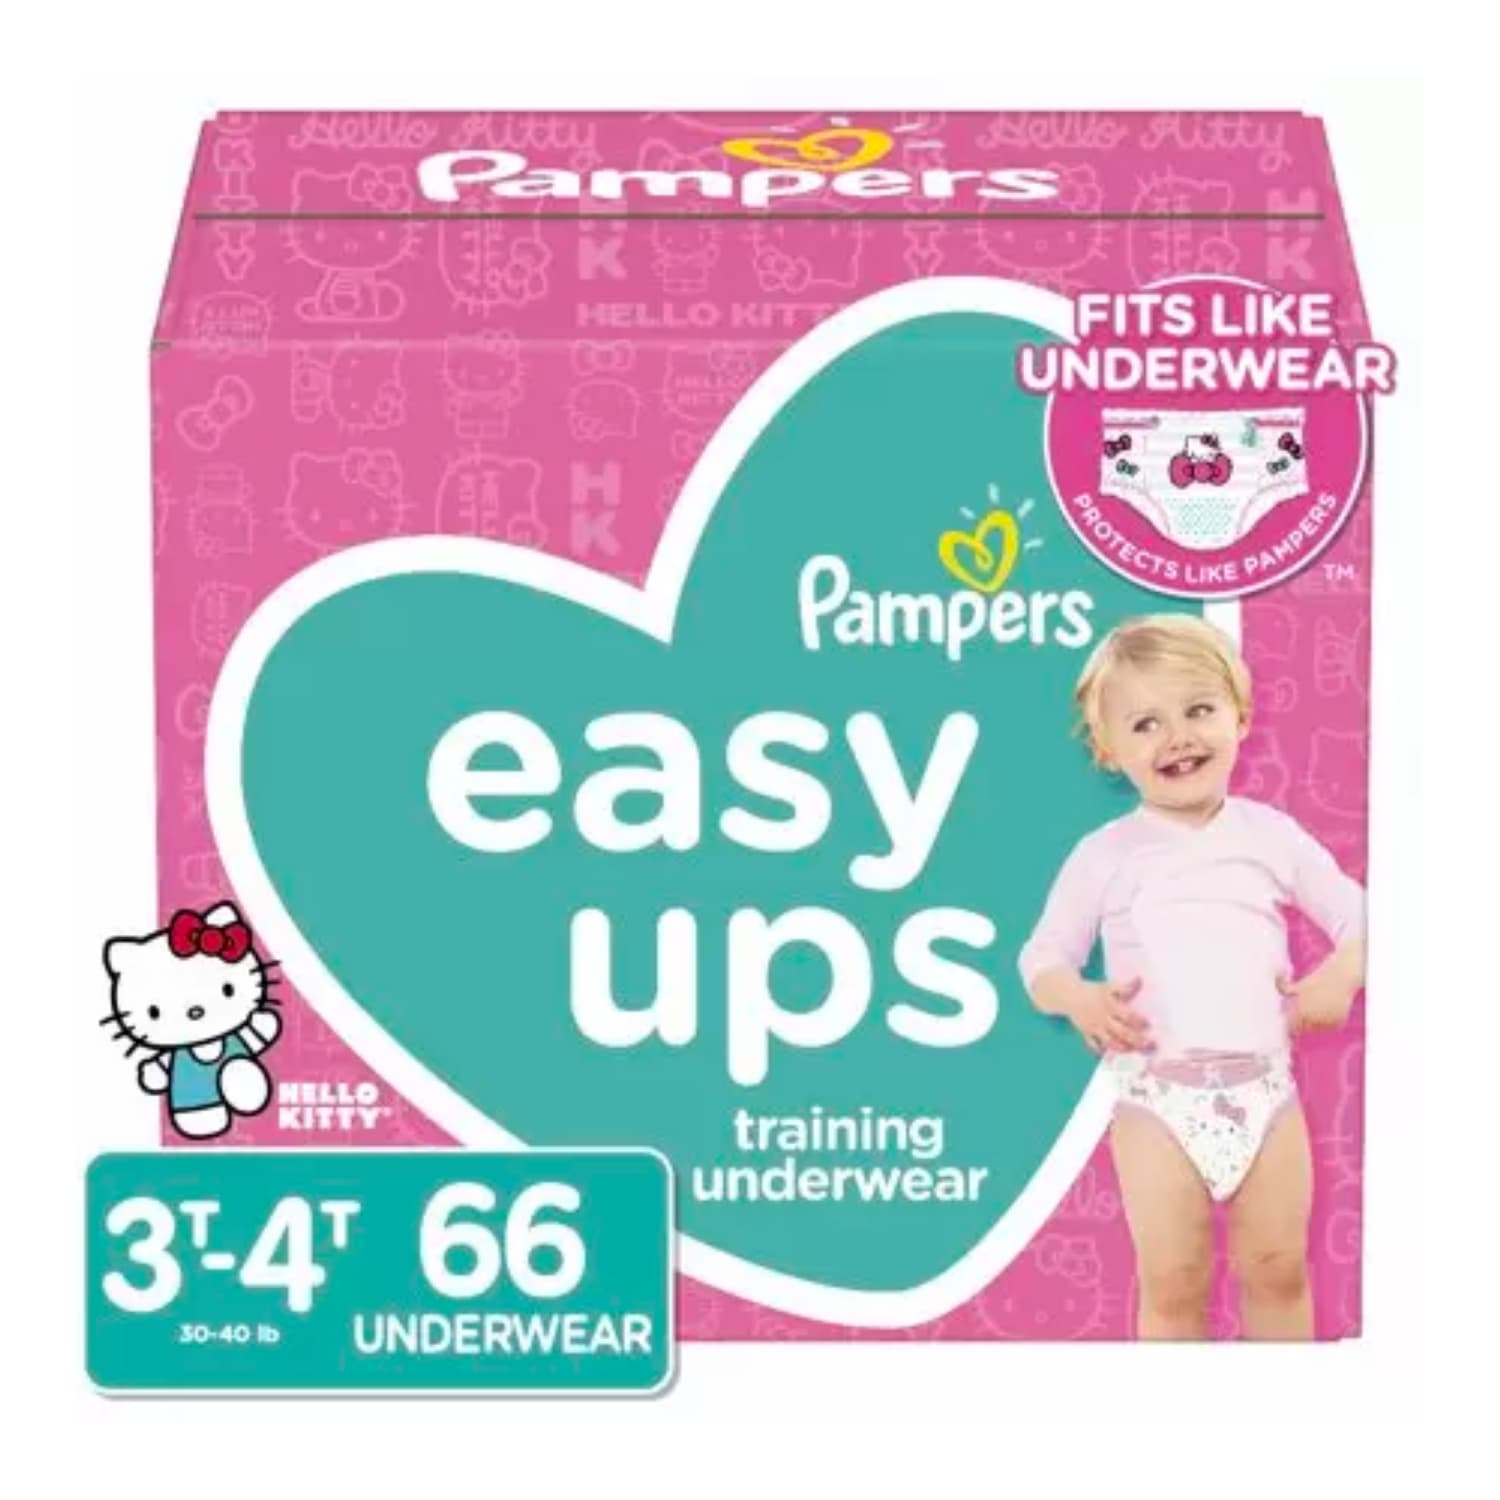 Pampers Easy Ups Training Pants for Boys (Size 3T-4T, 66 Count) - MedaKi